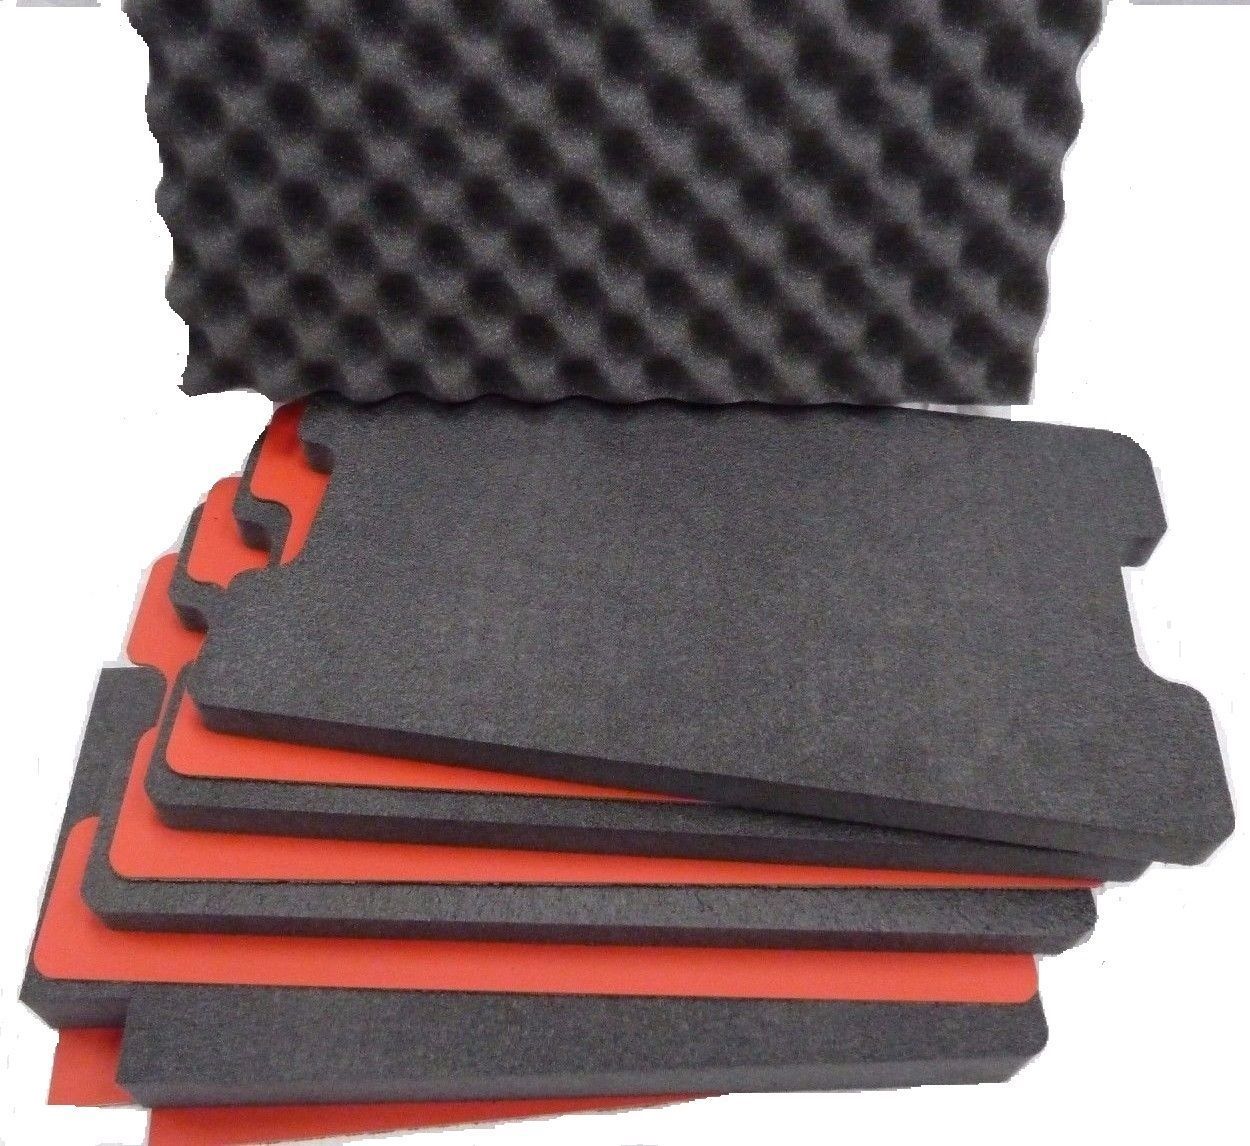 Pelican 1535 Air Tool Foam Kit, 4 Black Foam Pieces, 3 Red ABS Hard Plastic Pieces, One Red Bottom Foam ColorCase 